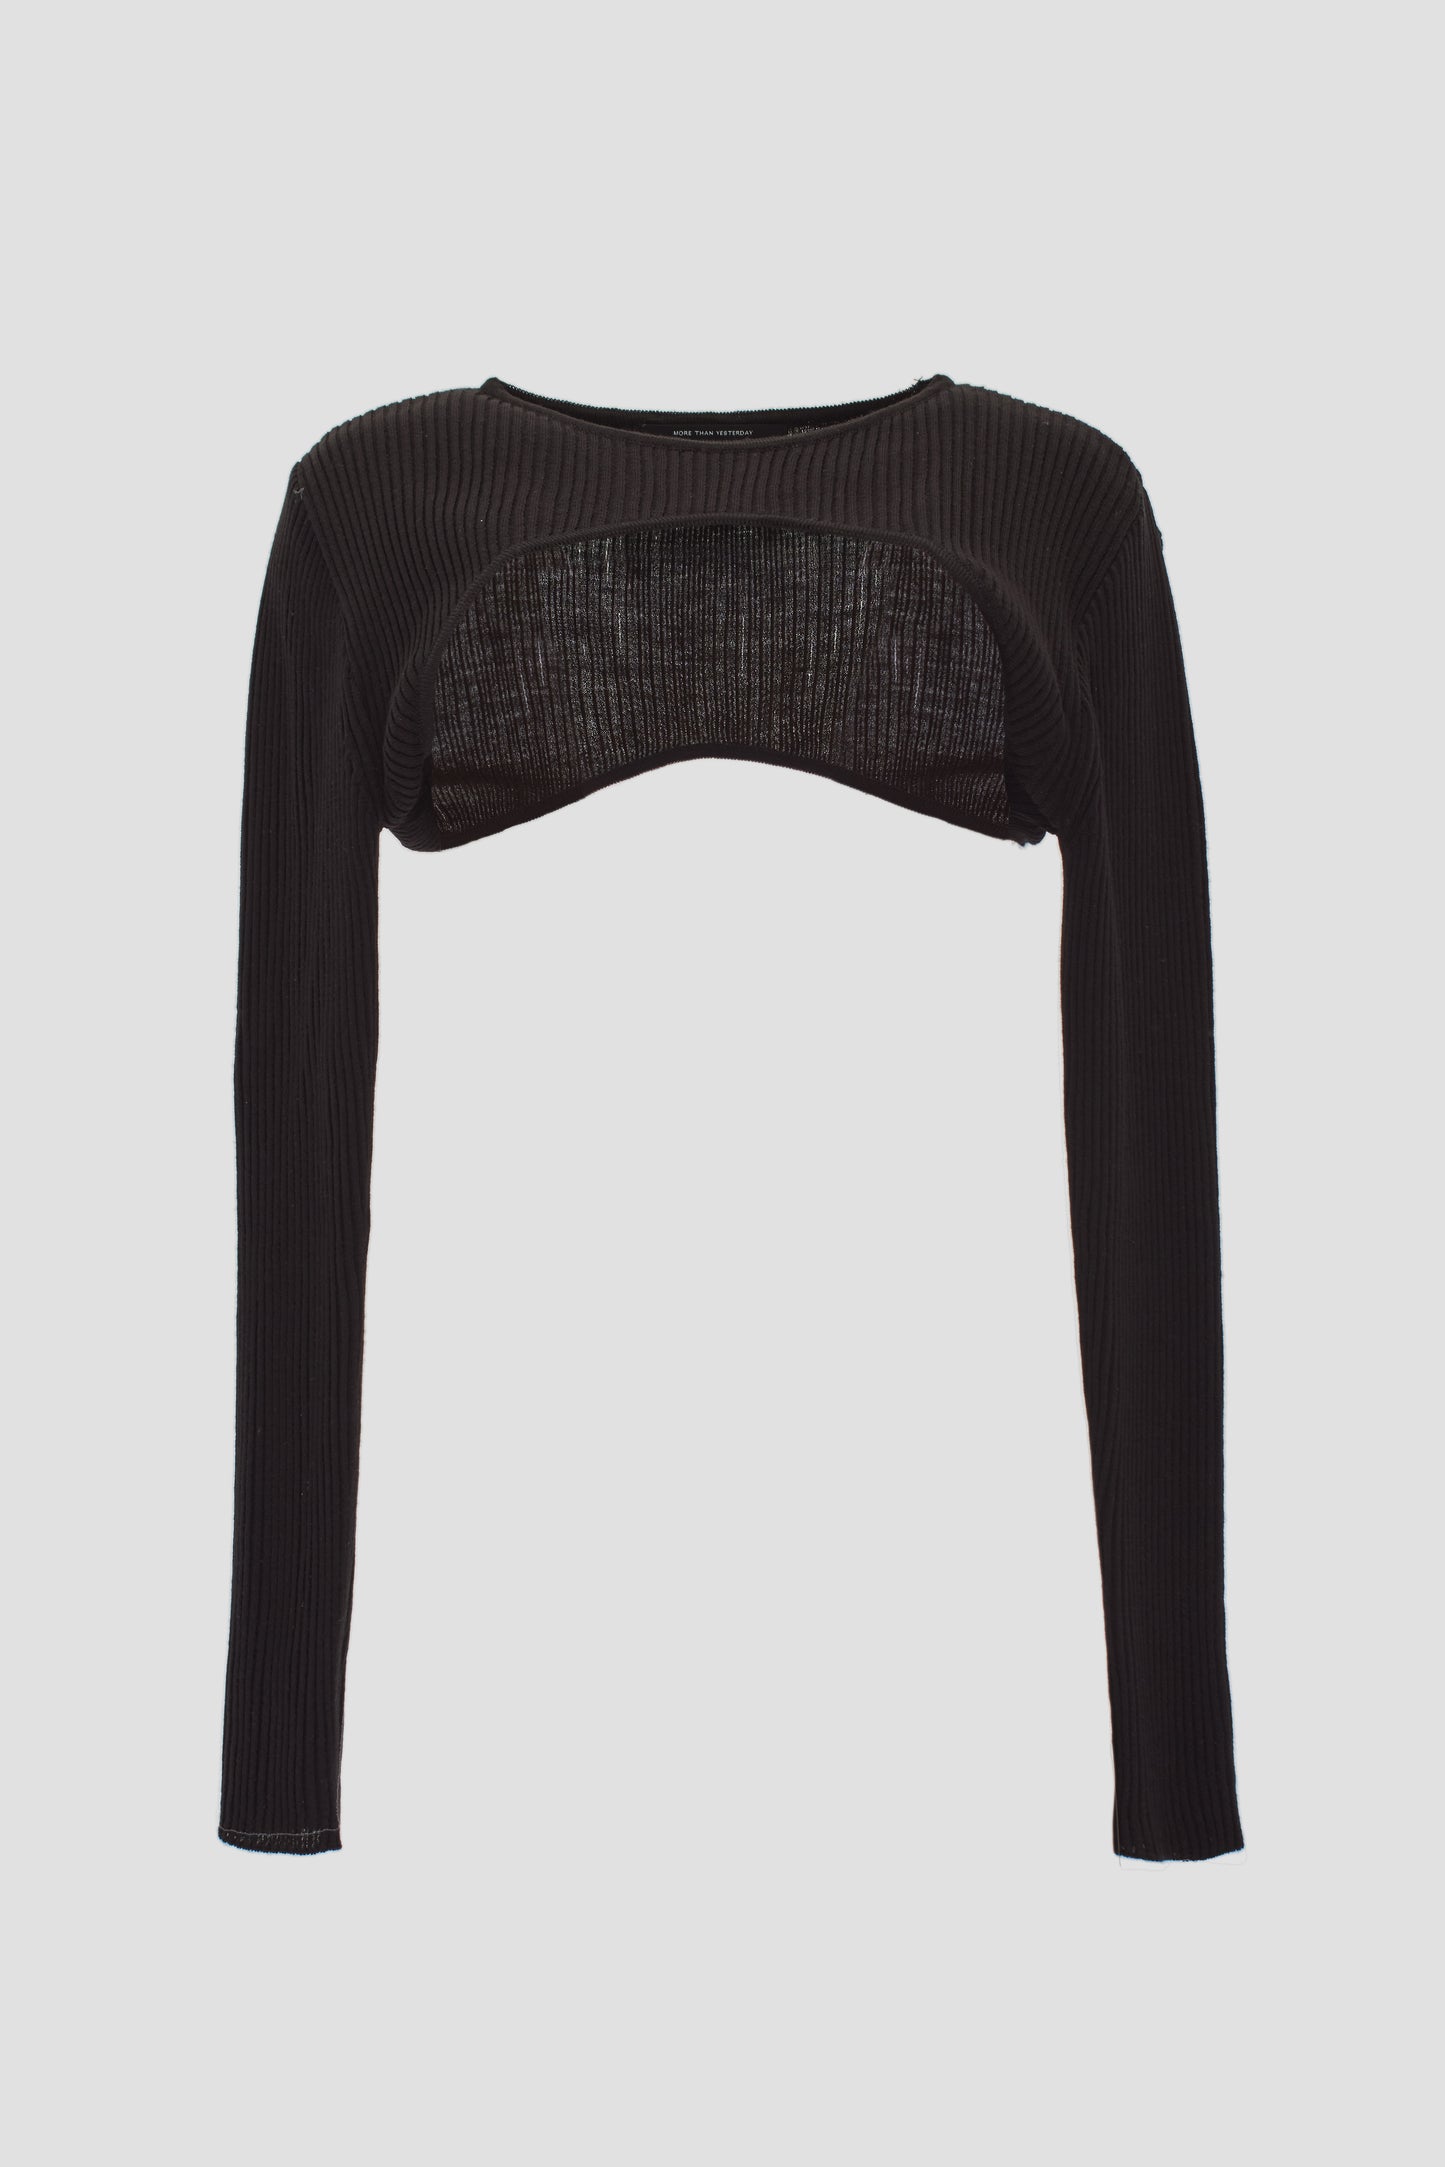 Cut Out Cropped Knit, Black